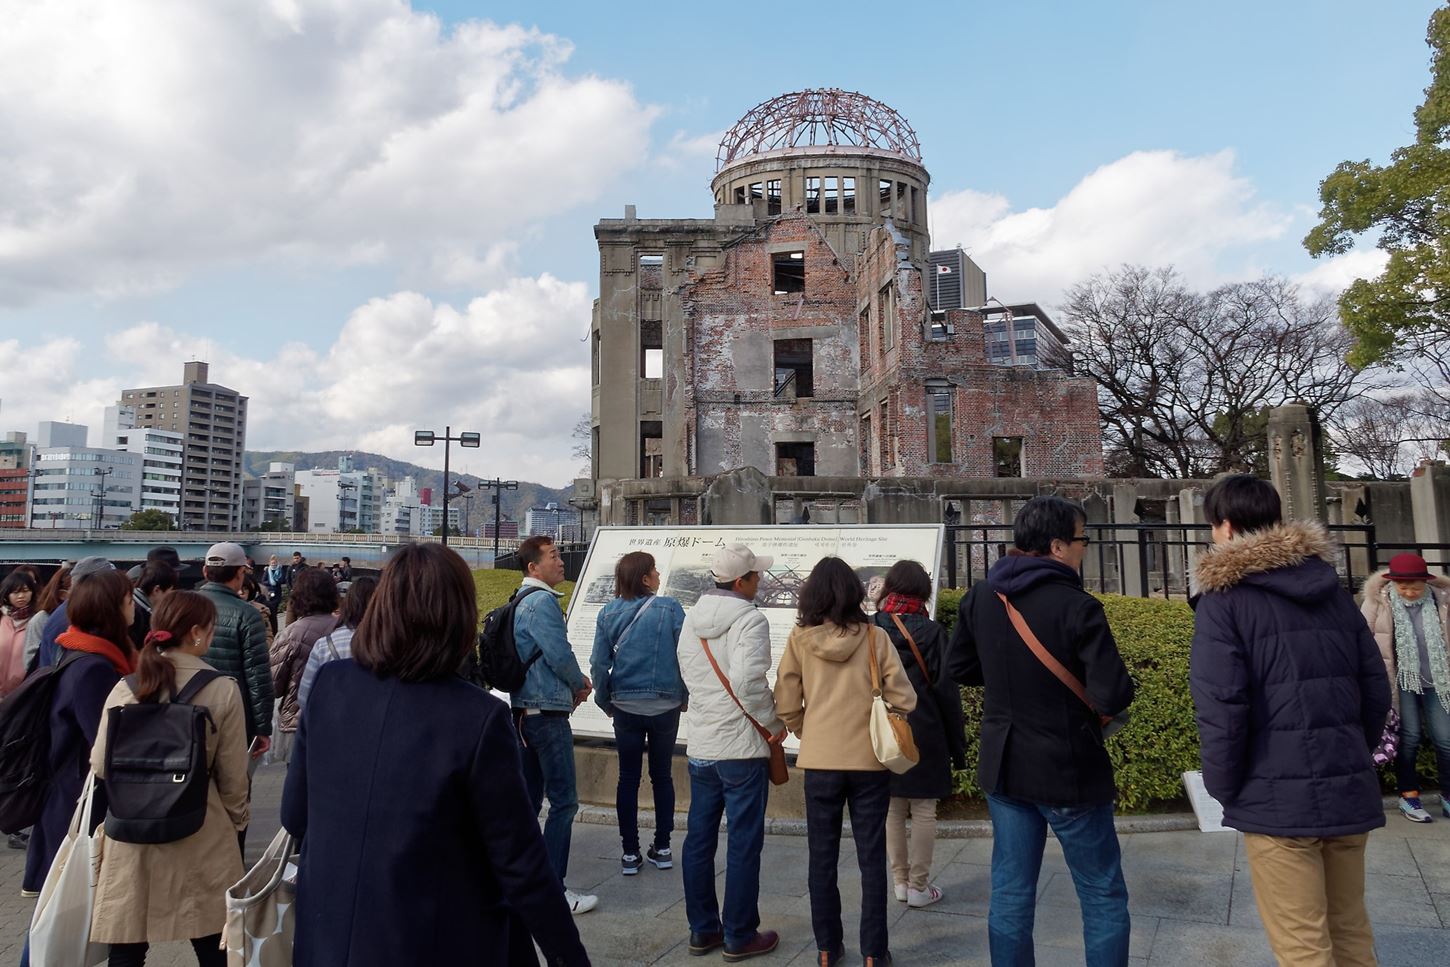 Sightseeing scenery that simply shows the weather in Hiroshima in March2